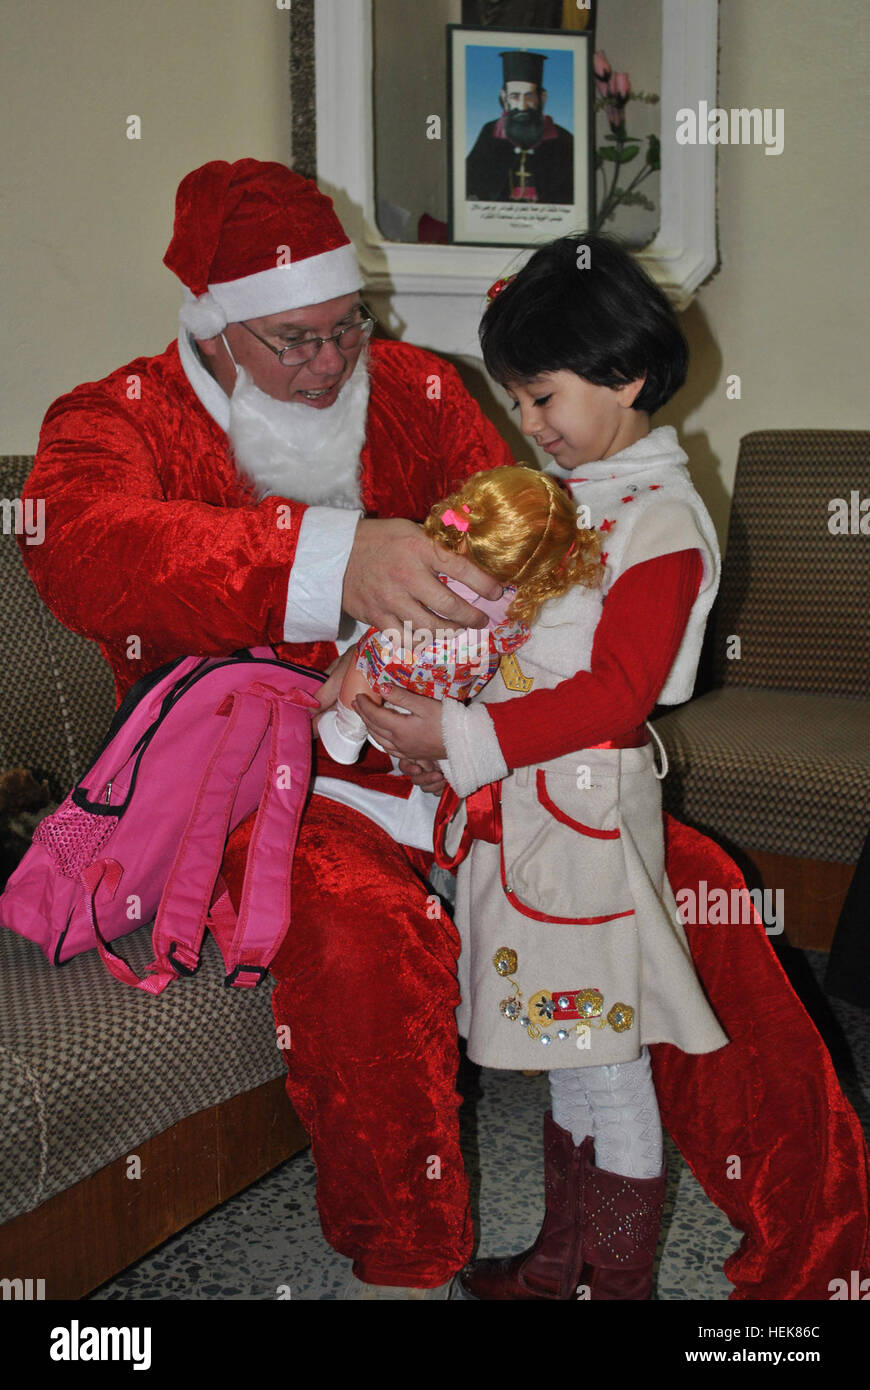 Maj. Michael Patterson, senior chaplain assigned to 4th Advise and Assist Brigade, 1st Cavalry Division, dressed as Iraq's Baba Noel, known more commonly in the United States as Santa Claus, gives a doll to a young Iraqi girl during a religious leader engagement at the Church of Mar Youhanna, or Saint John, in the town of Qara Qosh, Dec. 14, 2010. The gifts were collected through a team of soldiers from the U.S. Army Reserve 412th Civil Affairs Battalion, from Columbus, Ohio, attached to 4th AAB, 1st Cav Div. Patterson, a Vero Beach, Fla.-native, said he wanted to bring the Christmas spirit to Stock Photo